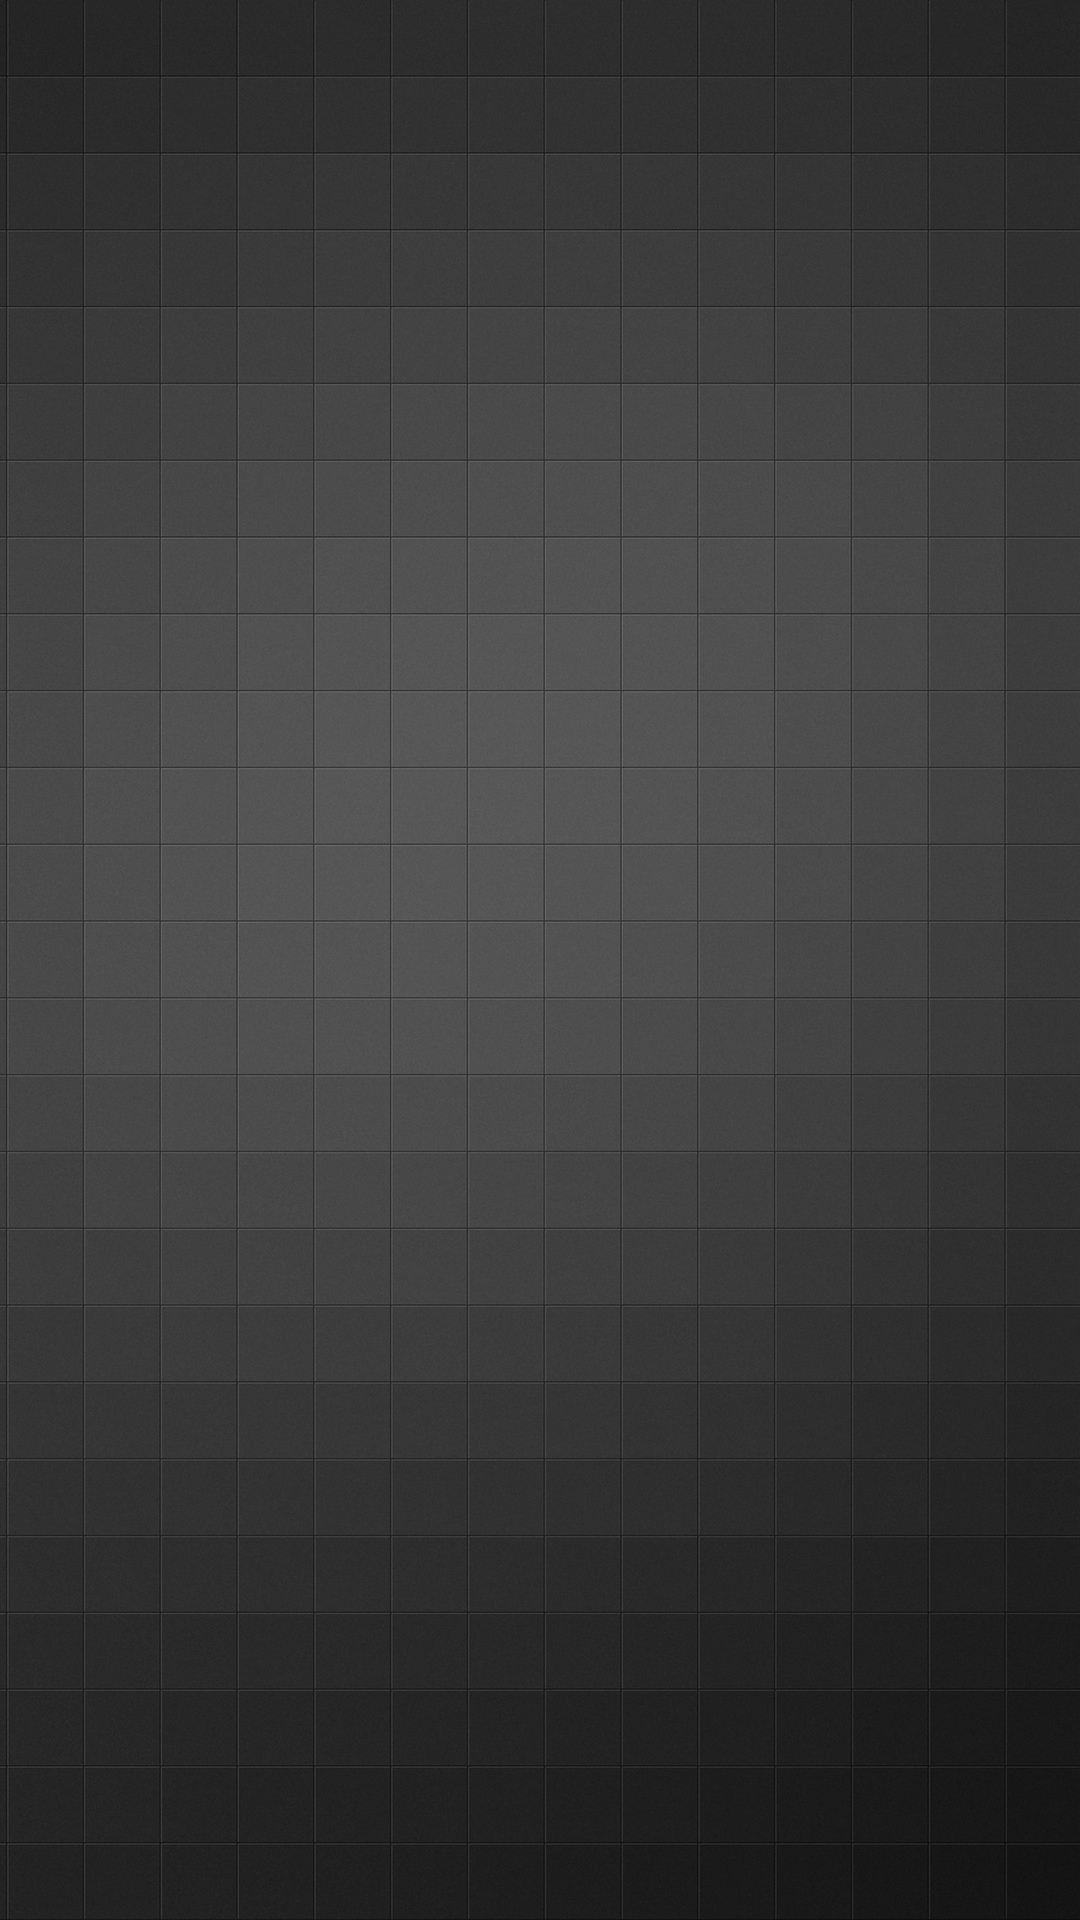 Wallpaper for galaxy s4 with gray square pattern in 1080x1920 resolution